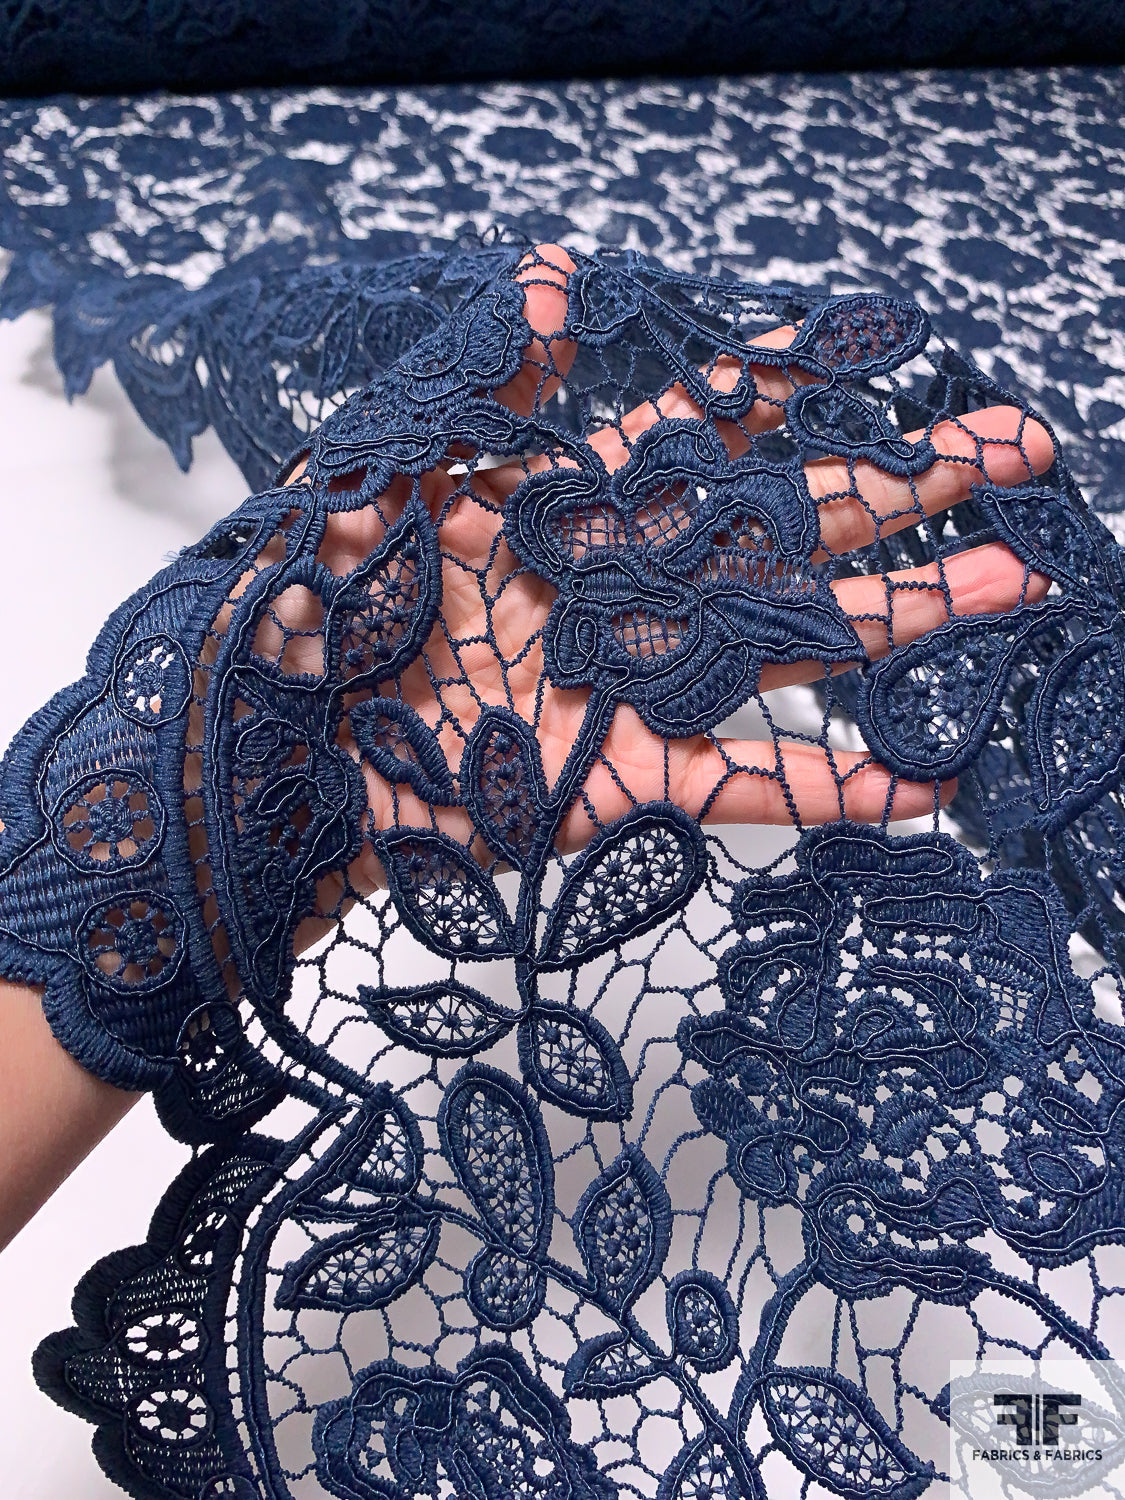 Pamella Roland Double-Scalloped Floral Guipure Lace with Light Cording - Dusty Navy